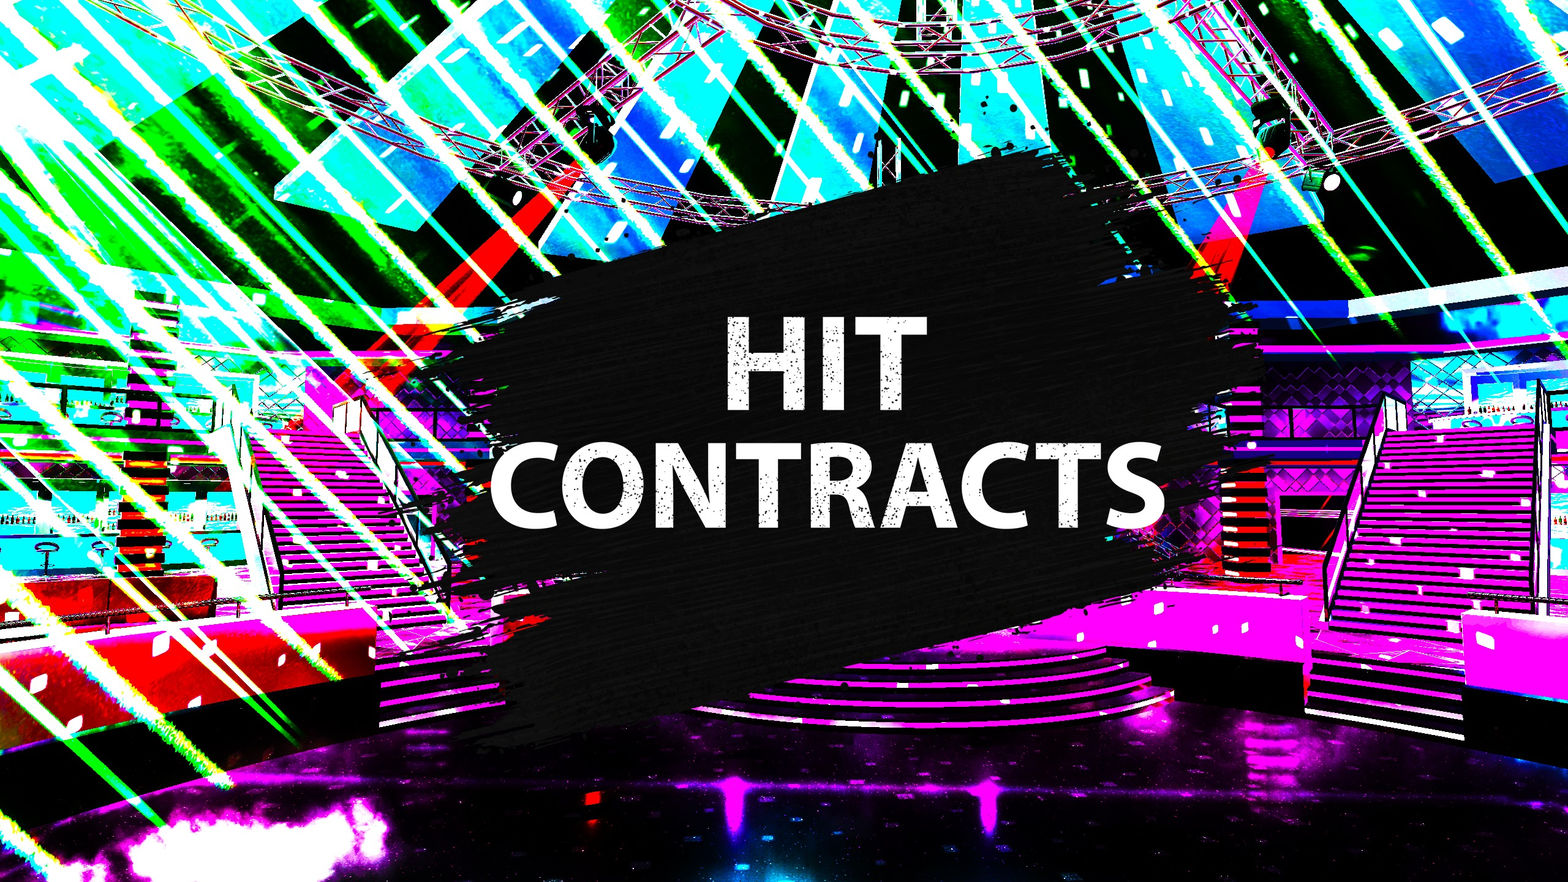 Hit Contracts VR